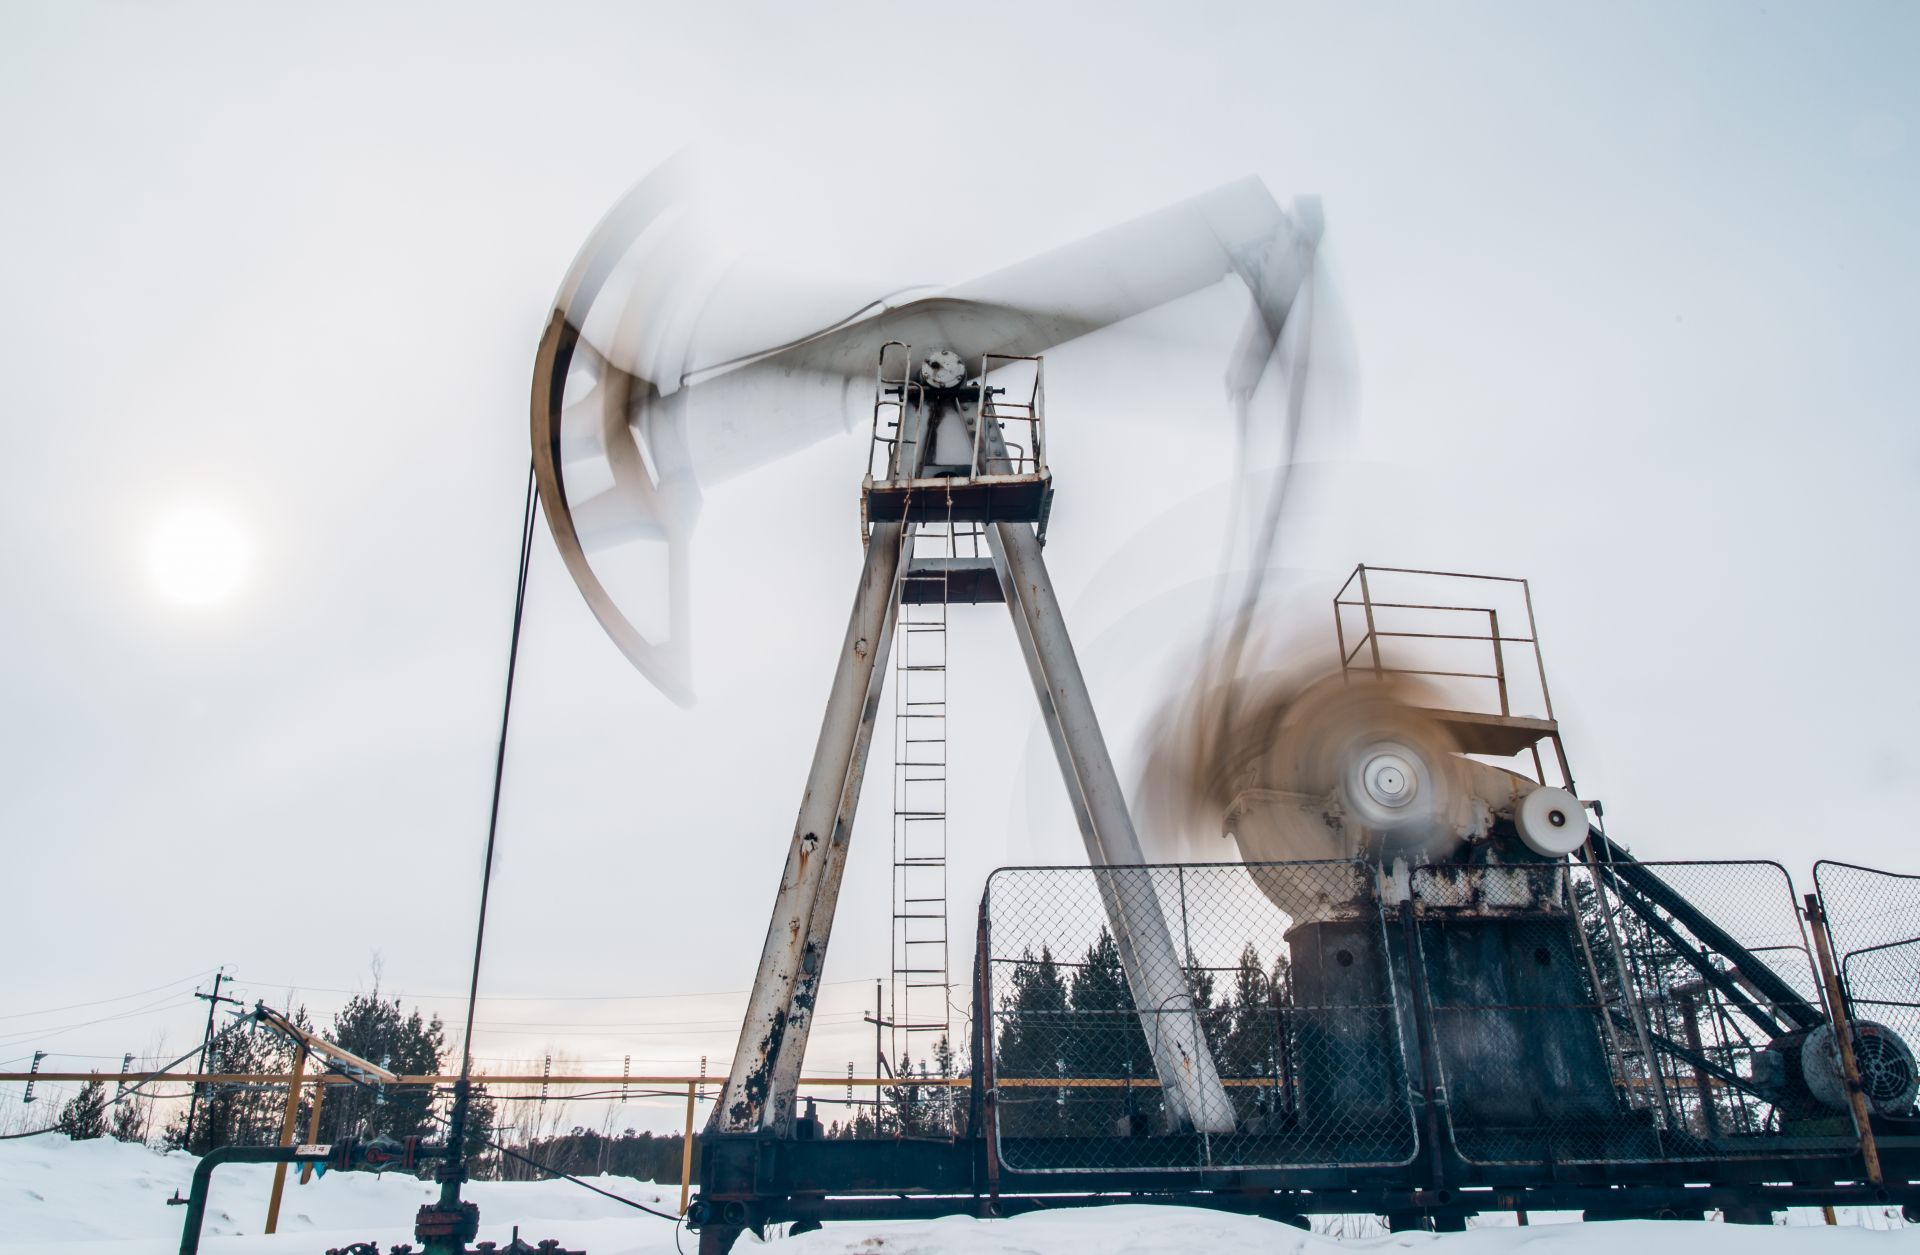 A photo of a pump jack extracting crude oil from a snow-covered well located near Surgut, Russia.